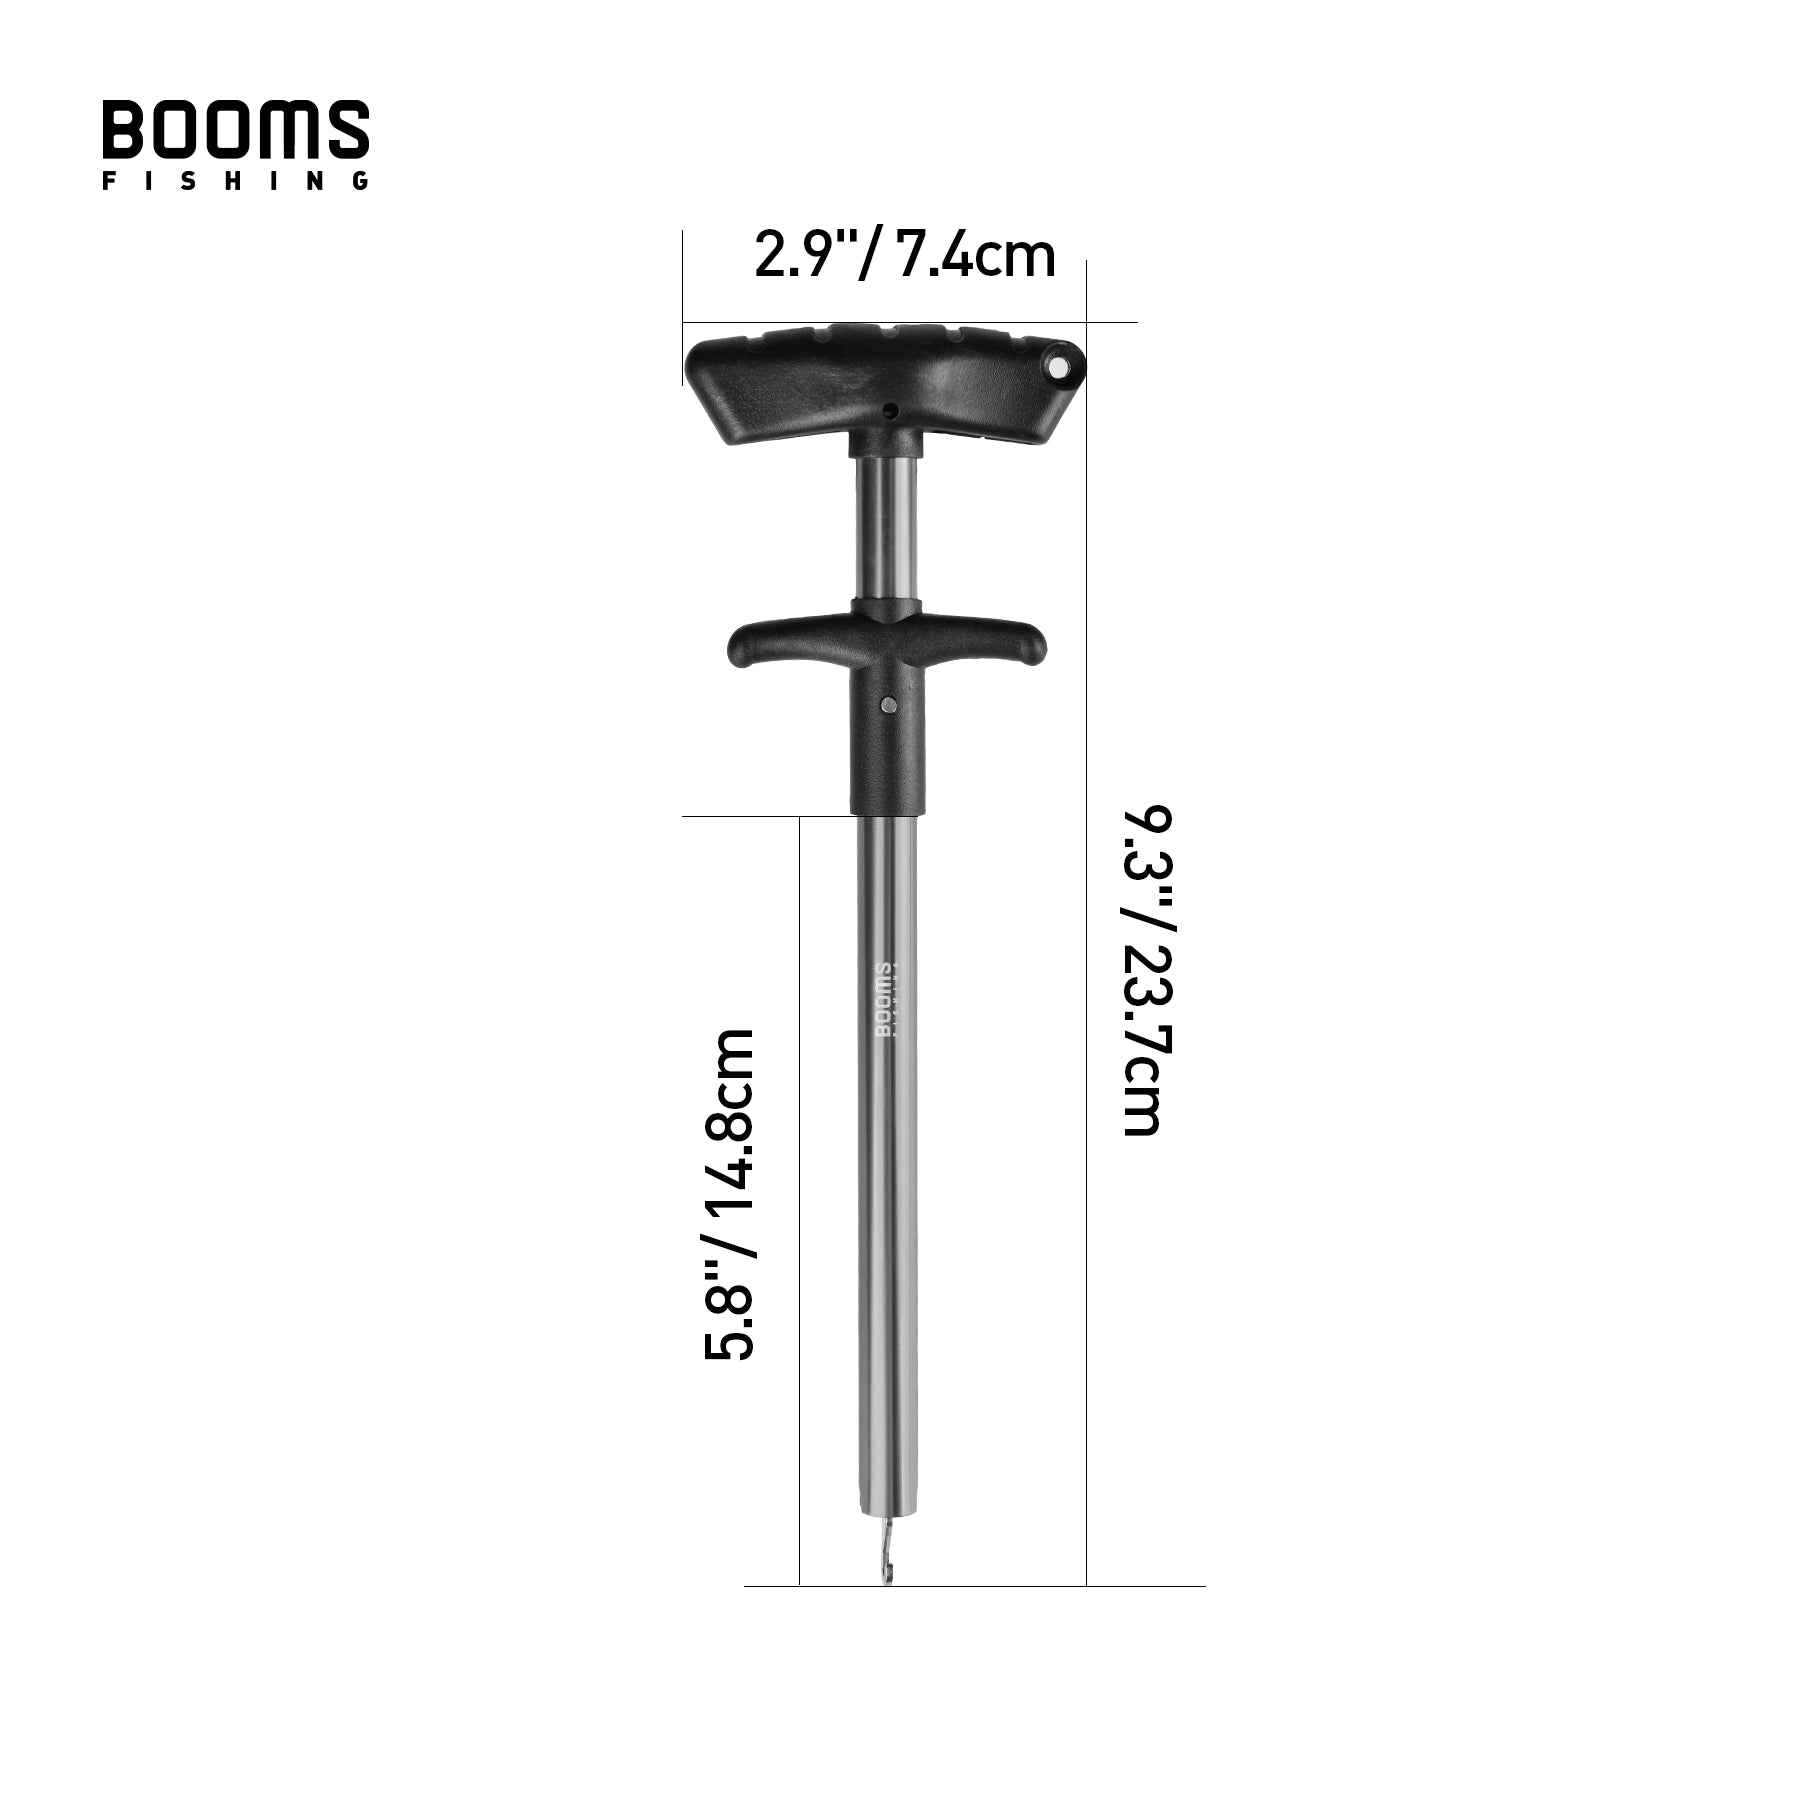  Booms Fishing R2 Hook Remover Aluminium Squeeze-Out Fish Hook  Tools 10 Inches Silver : Sports & Outdoors